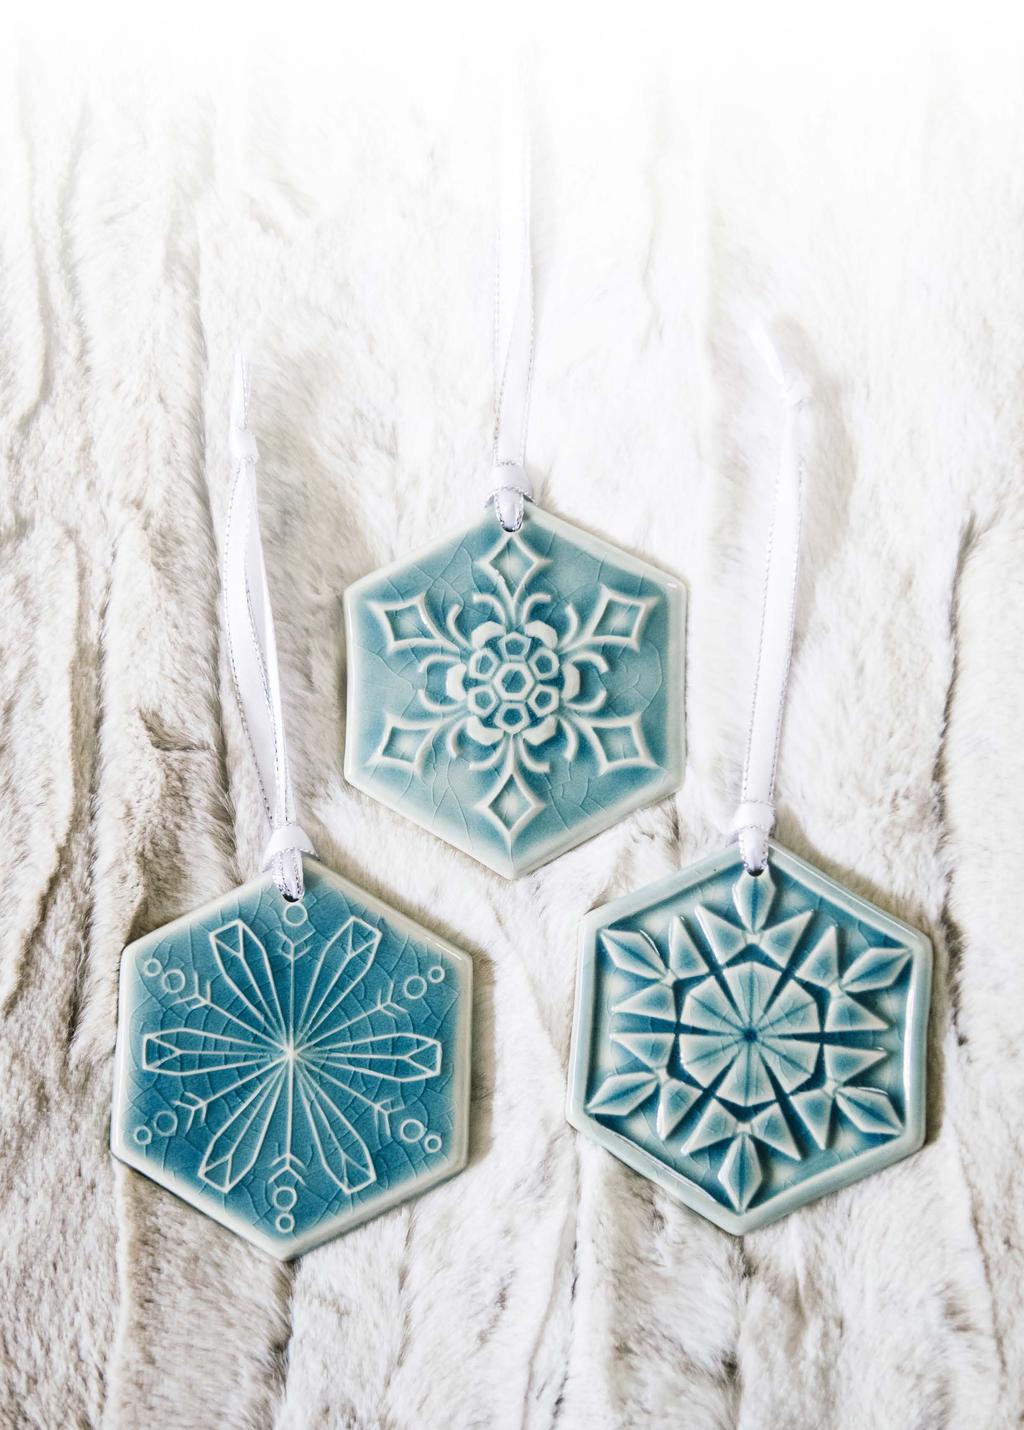 WARM WINTER WISHES FROM PEWABIC Nothing conveys the spirit of the holidays better than a gift made by hand.